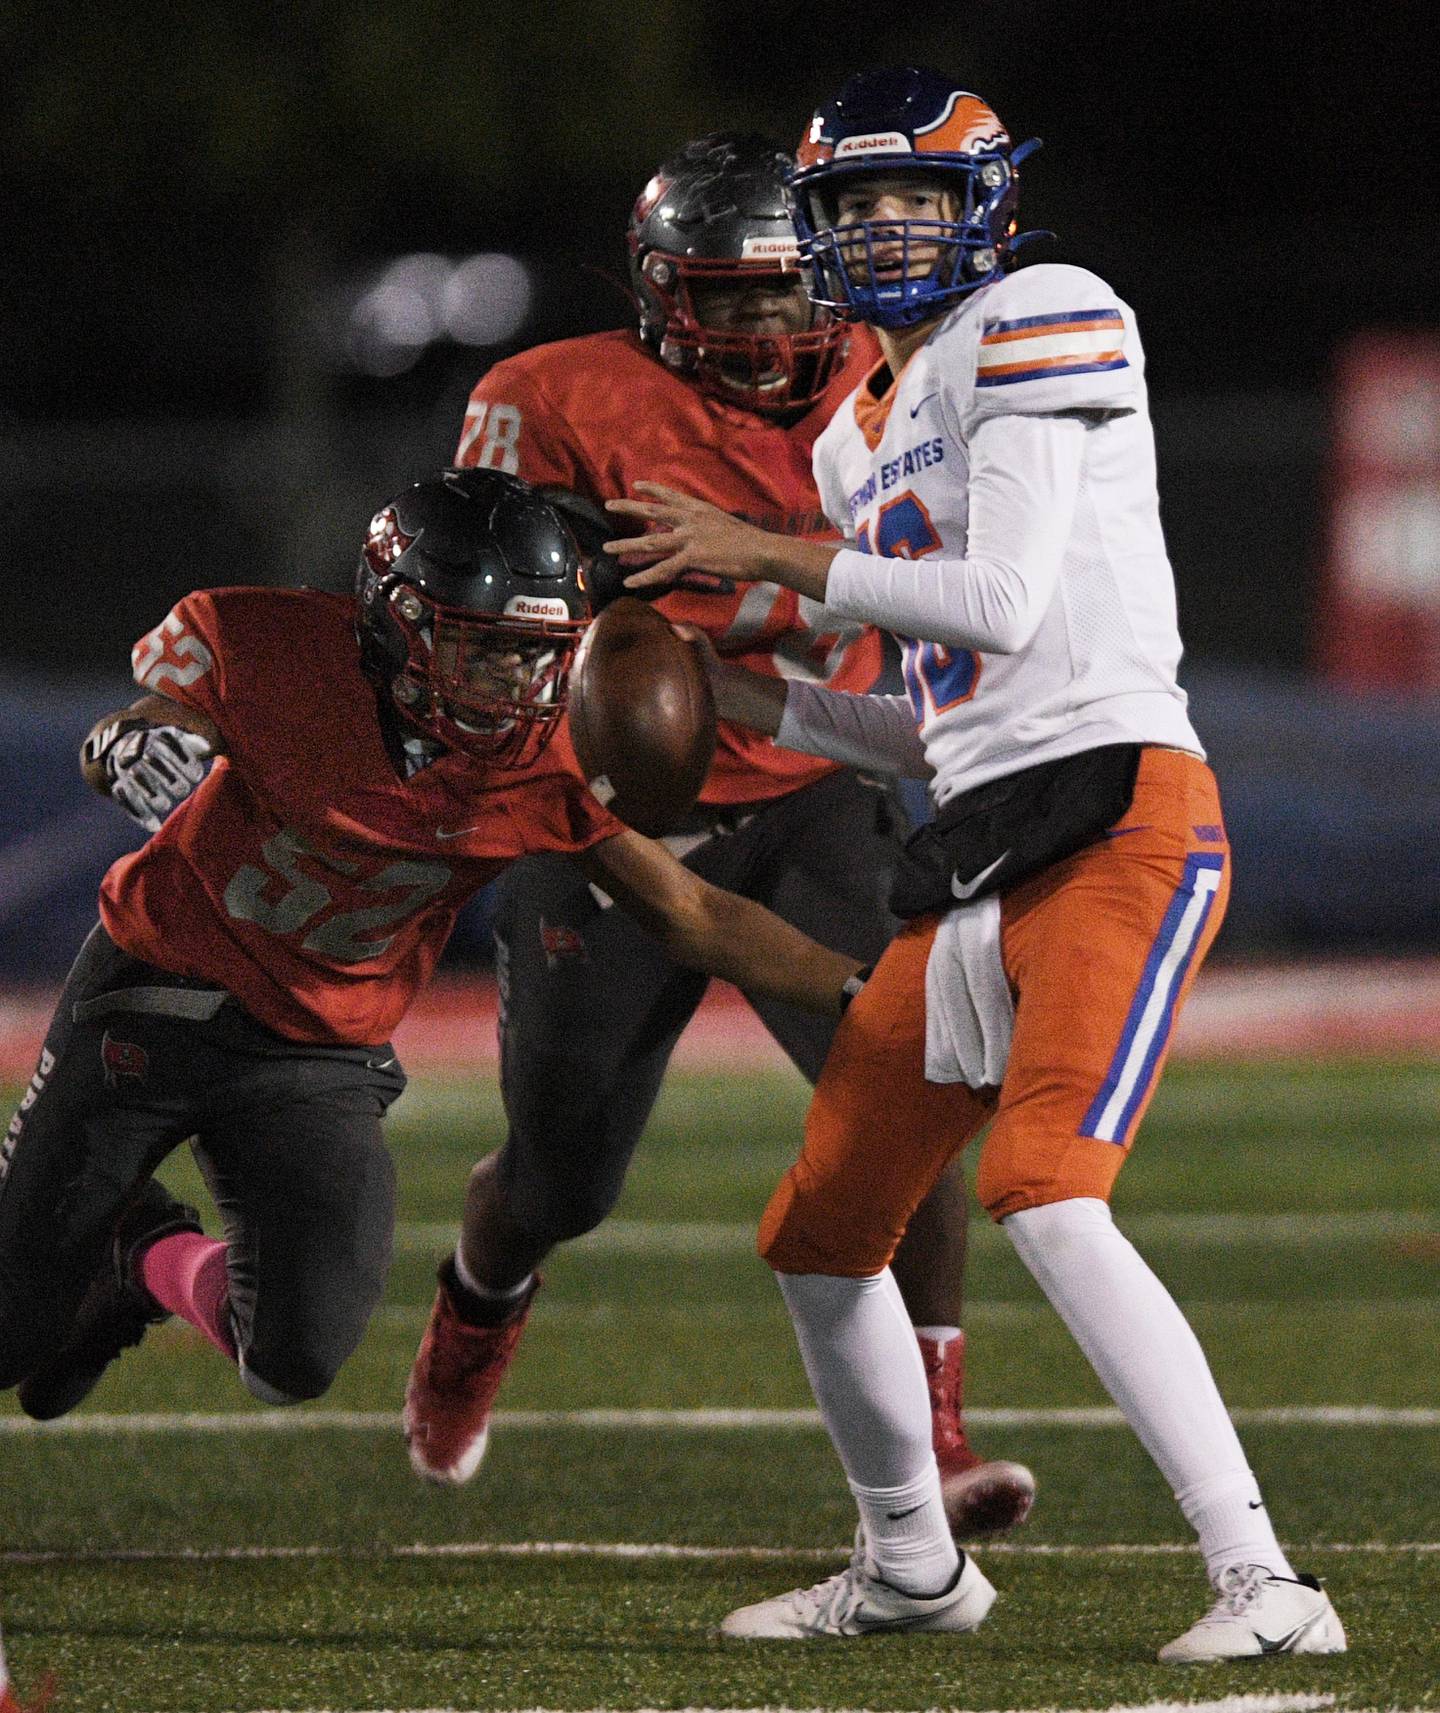 Palatine's Daevion Farrow rushes in to sack Hoffman Estates quarterback Aiden Cyr in a football game in Palatine on Friday, October 22, 2021.